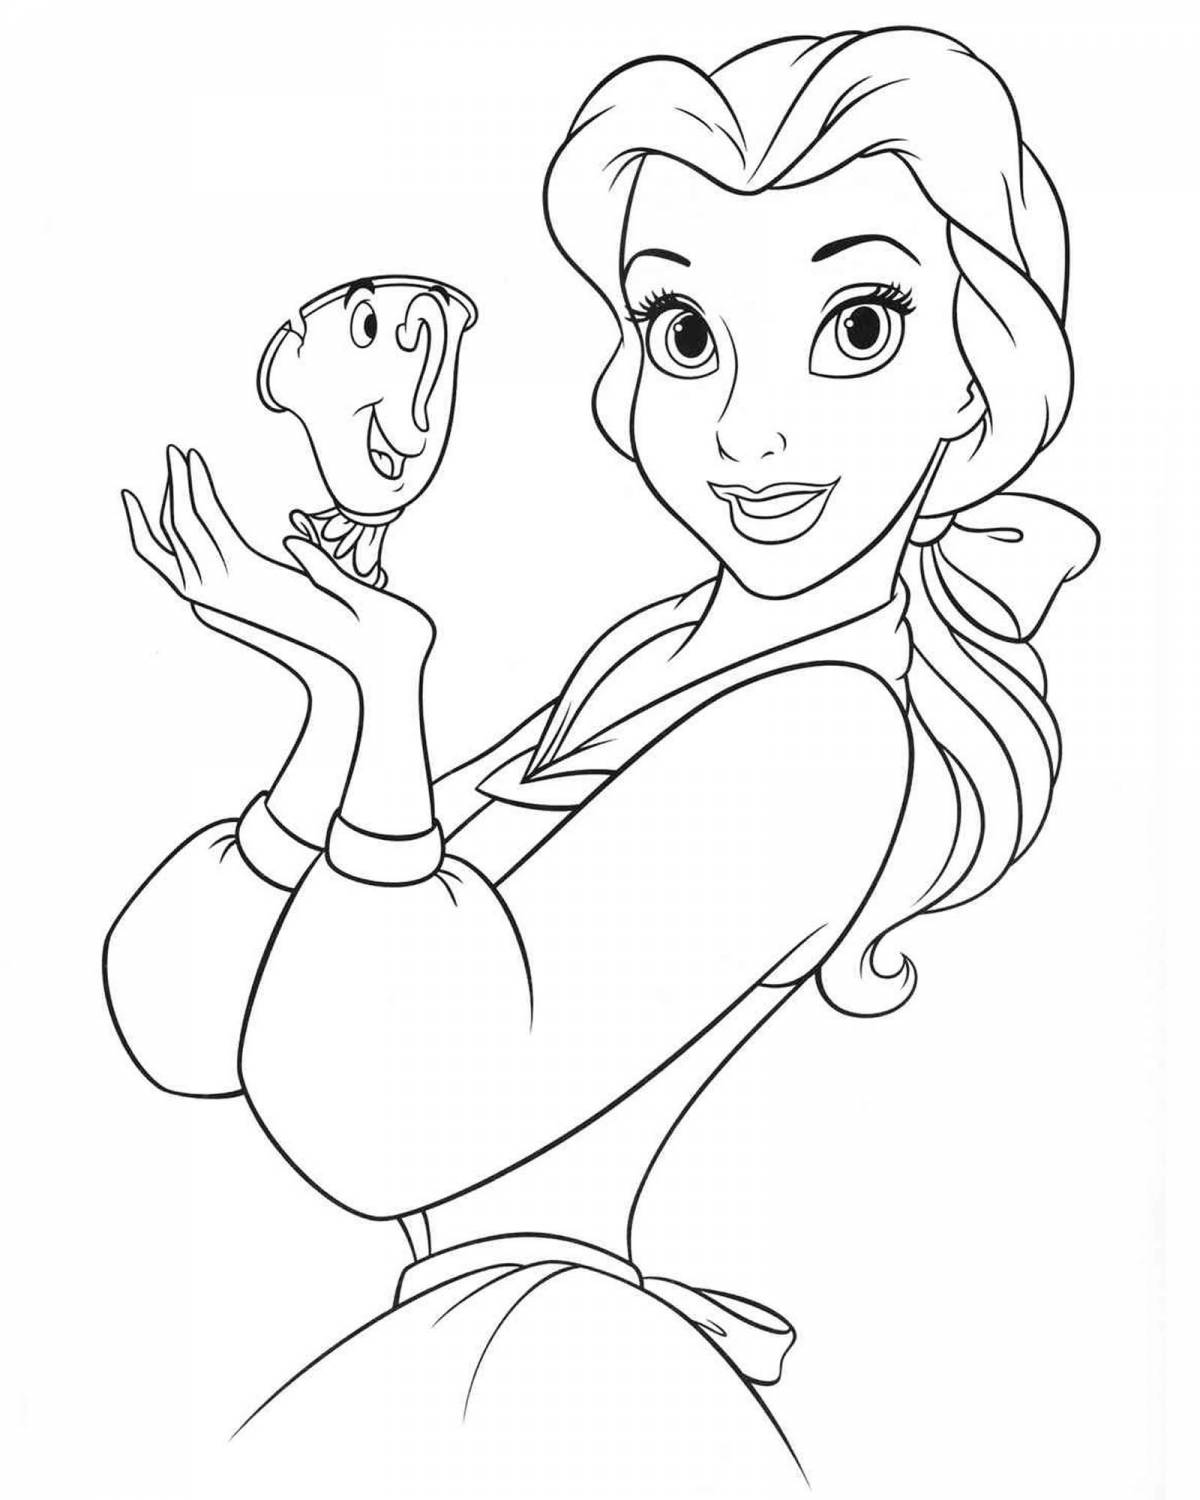 Fashion underwear coloring pages for kids